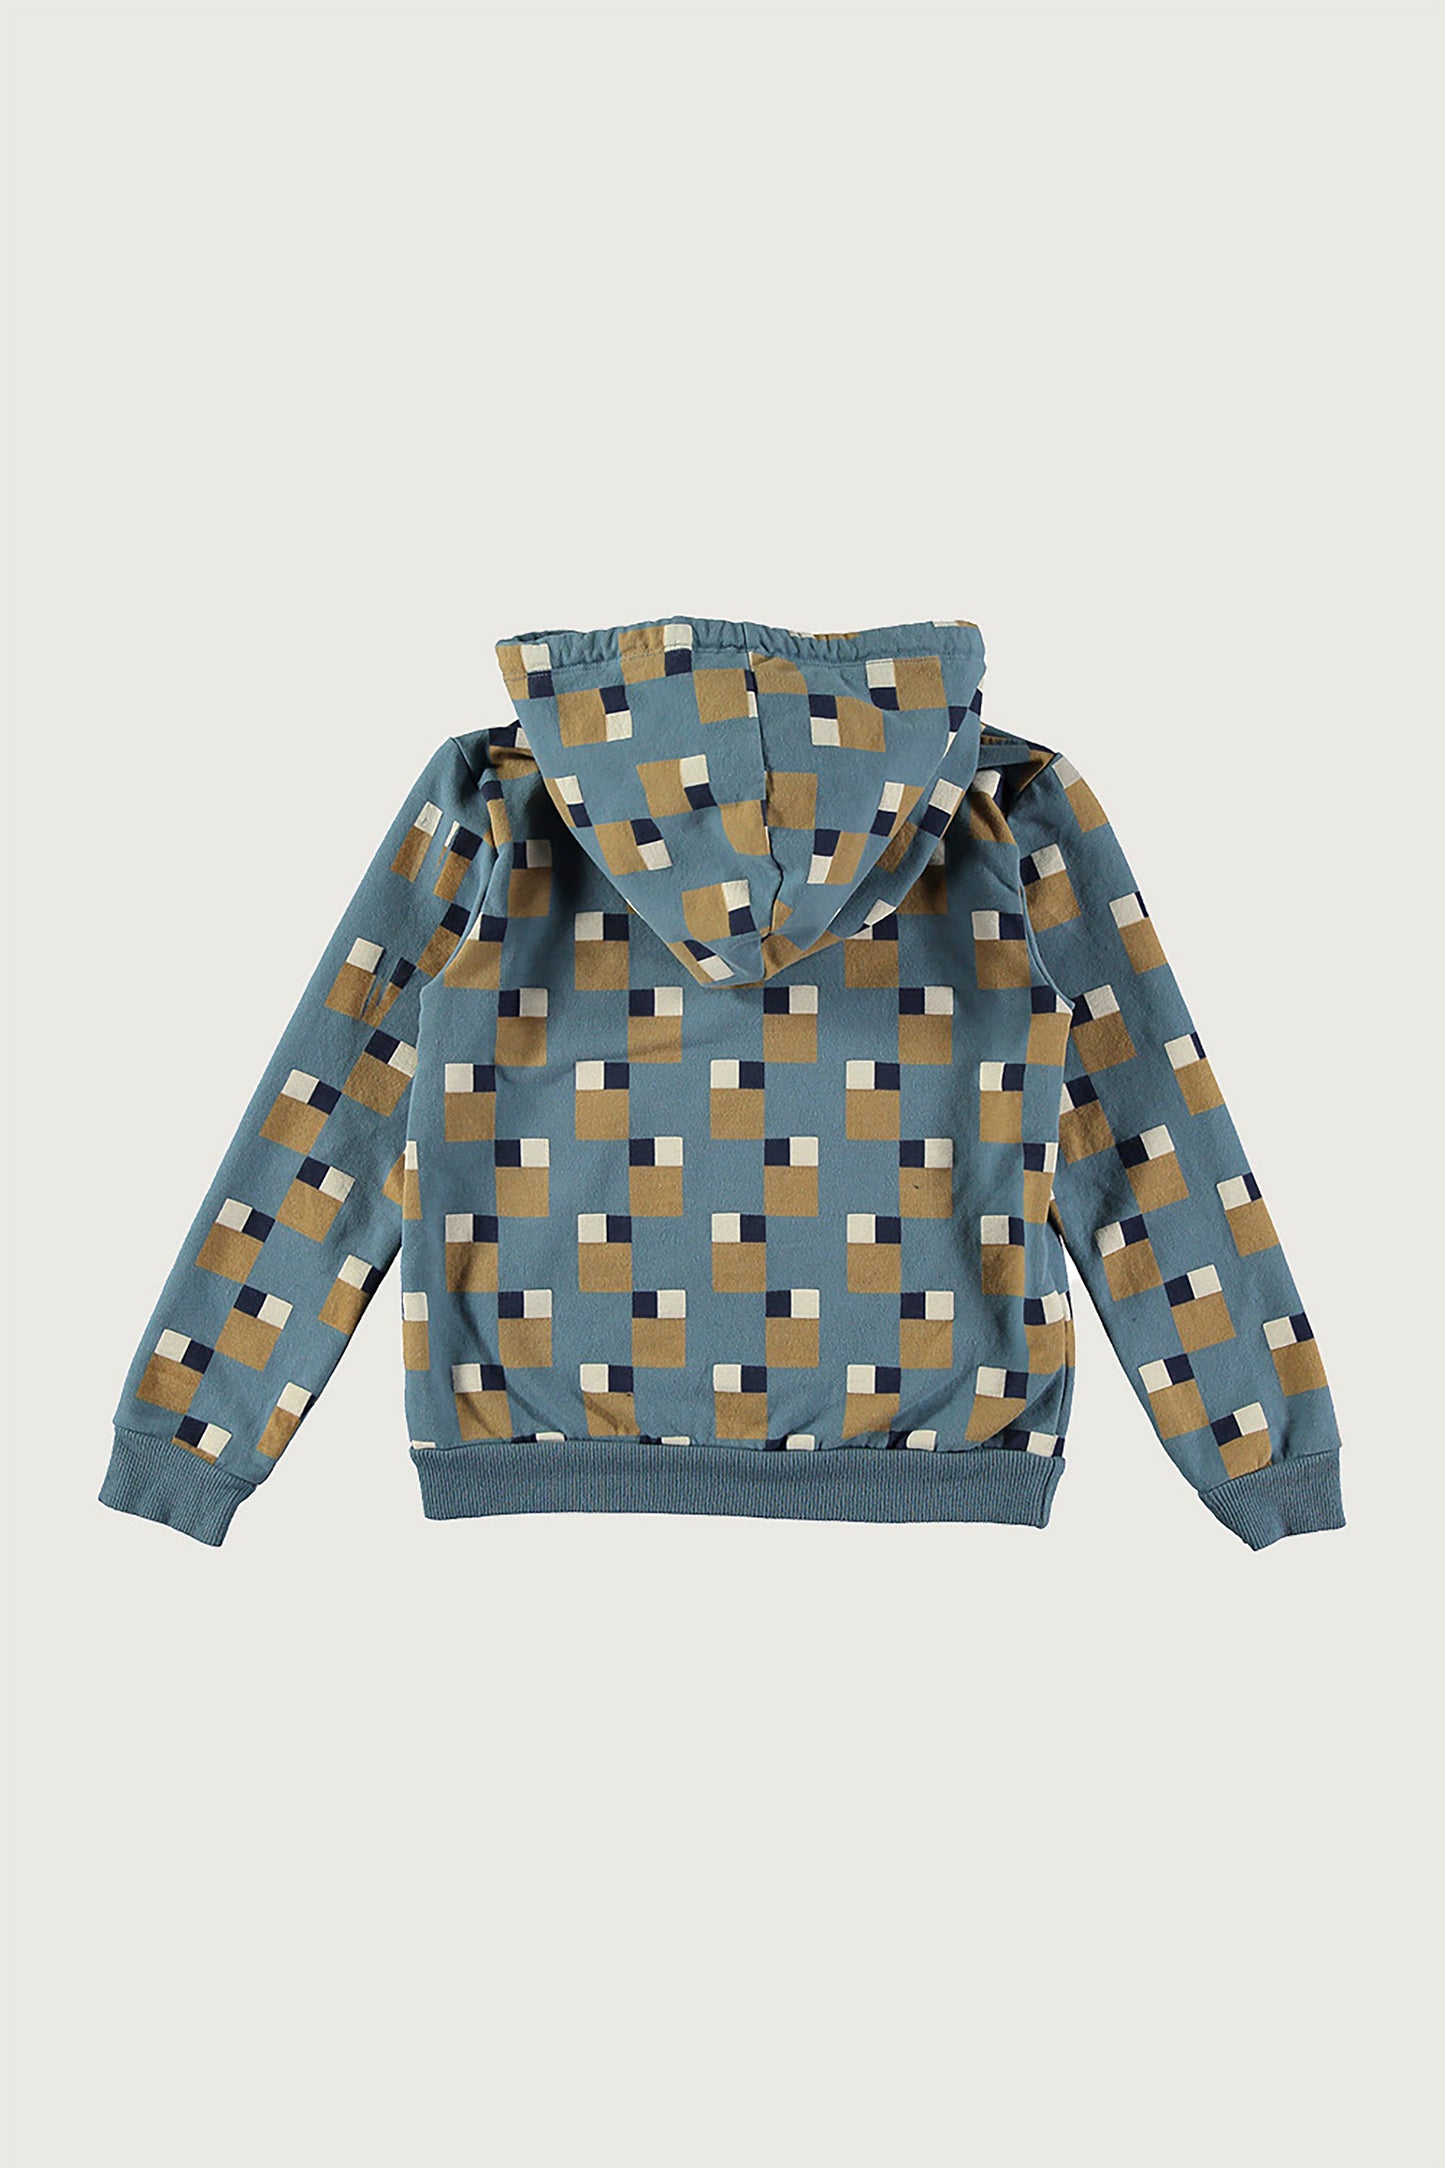 Coco Au Lait ABSTRACT ART HOODIE  Blue Mirage